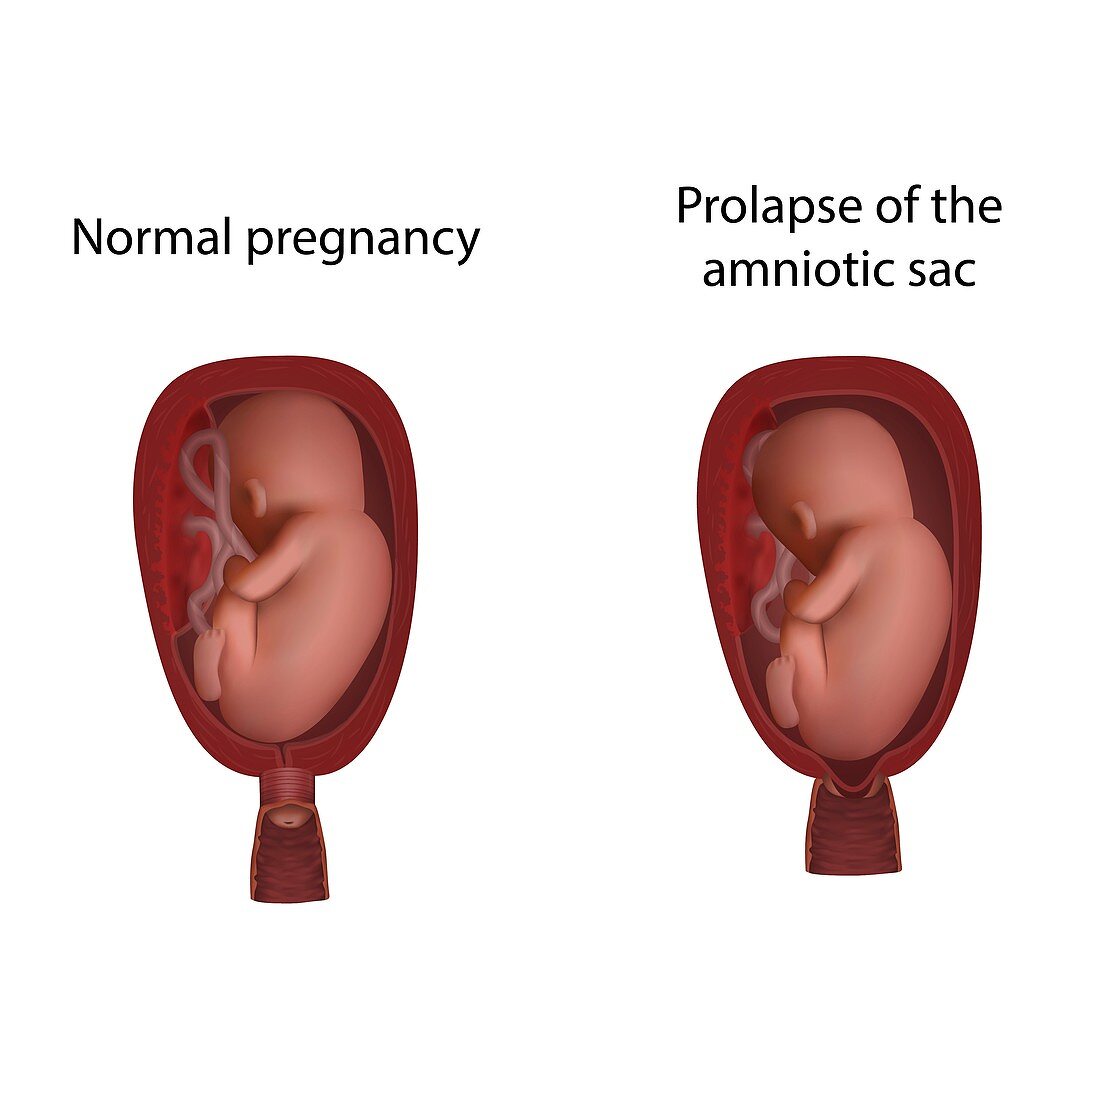 Amniotic sac prolapse and normal pregnancy, illustration